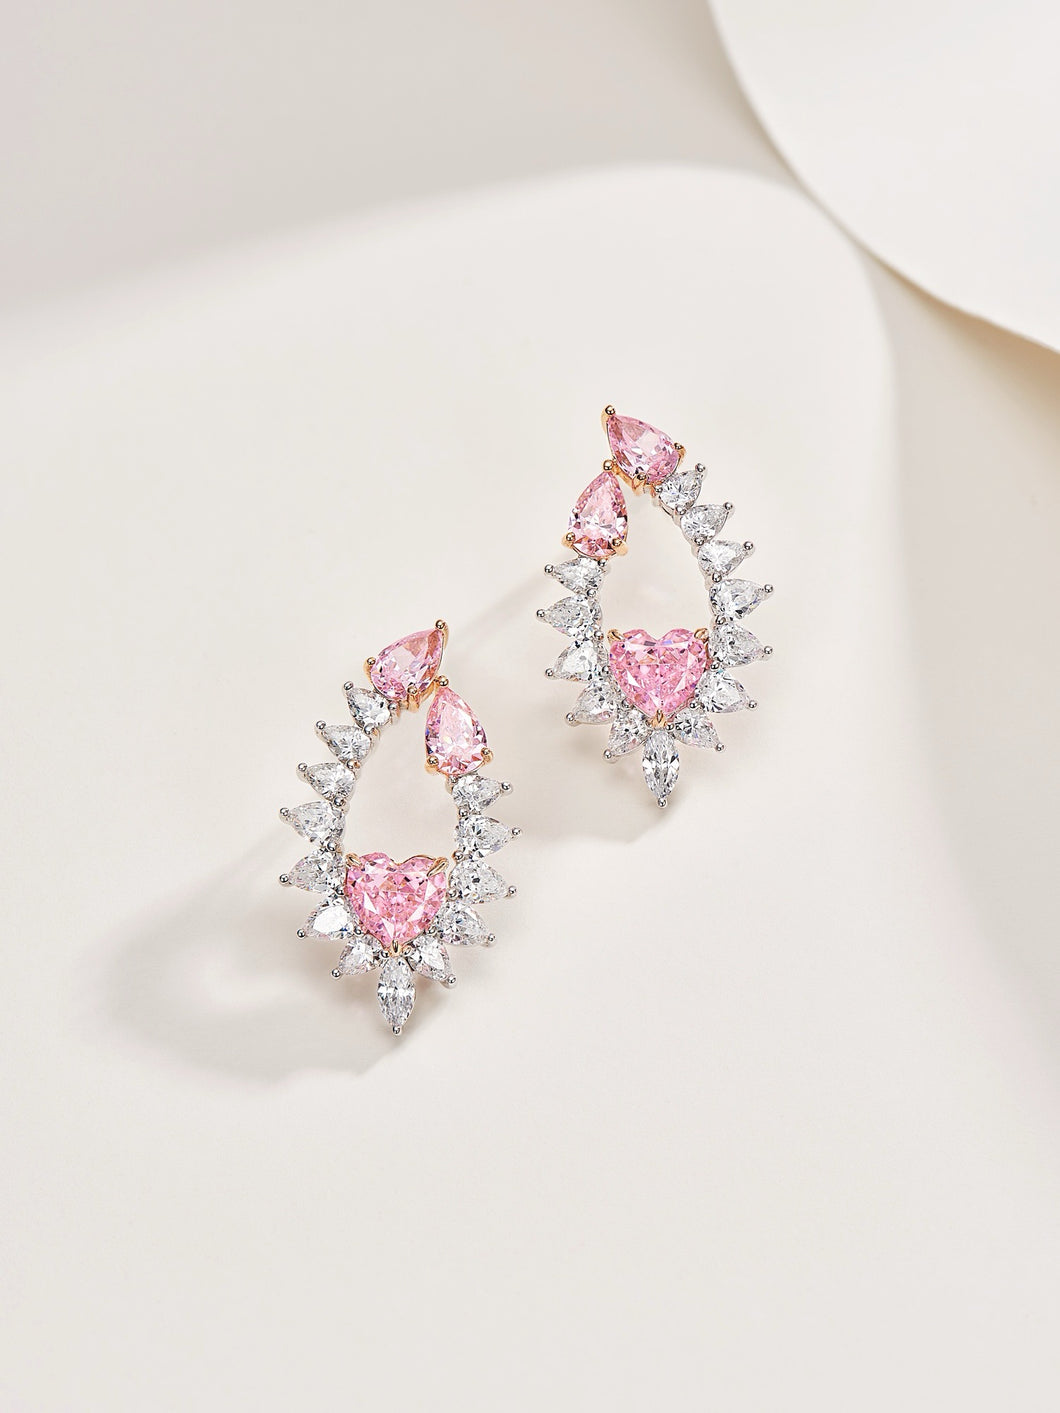 Heart's Radiance: Heart-Shaped Natural Zircon Gold-Plated Silver Earrings